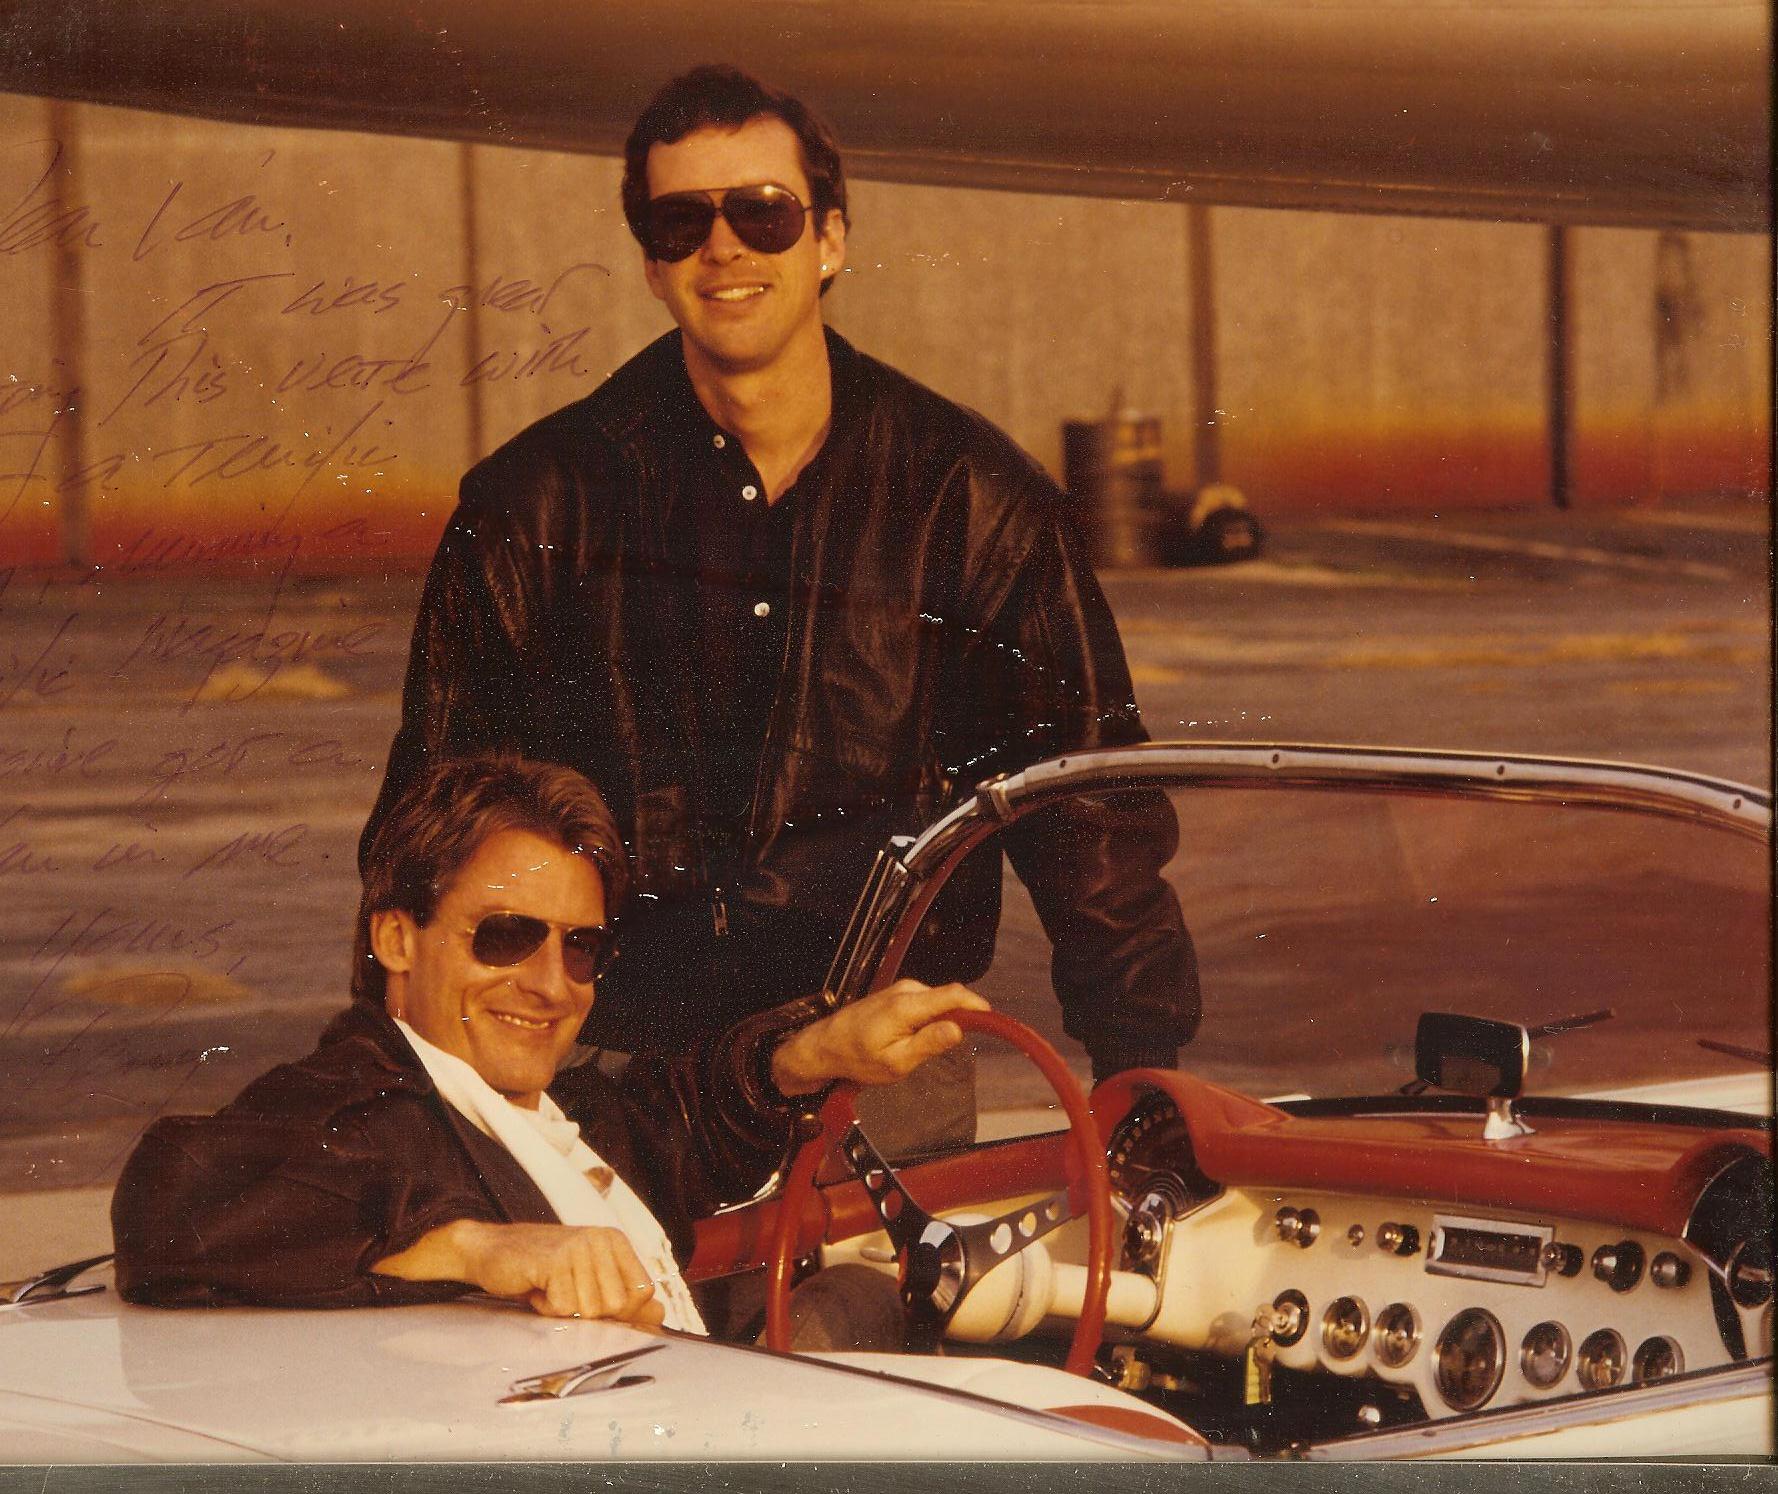 Perry King, C. Van Tune during magazine photo shoot in 1987.